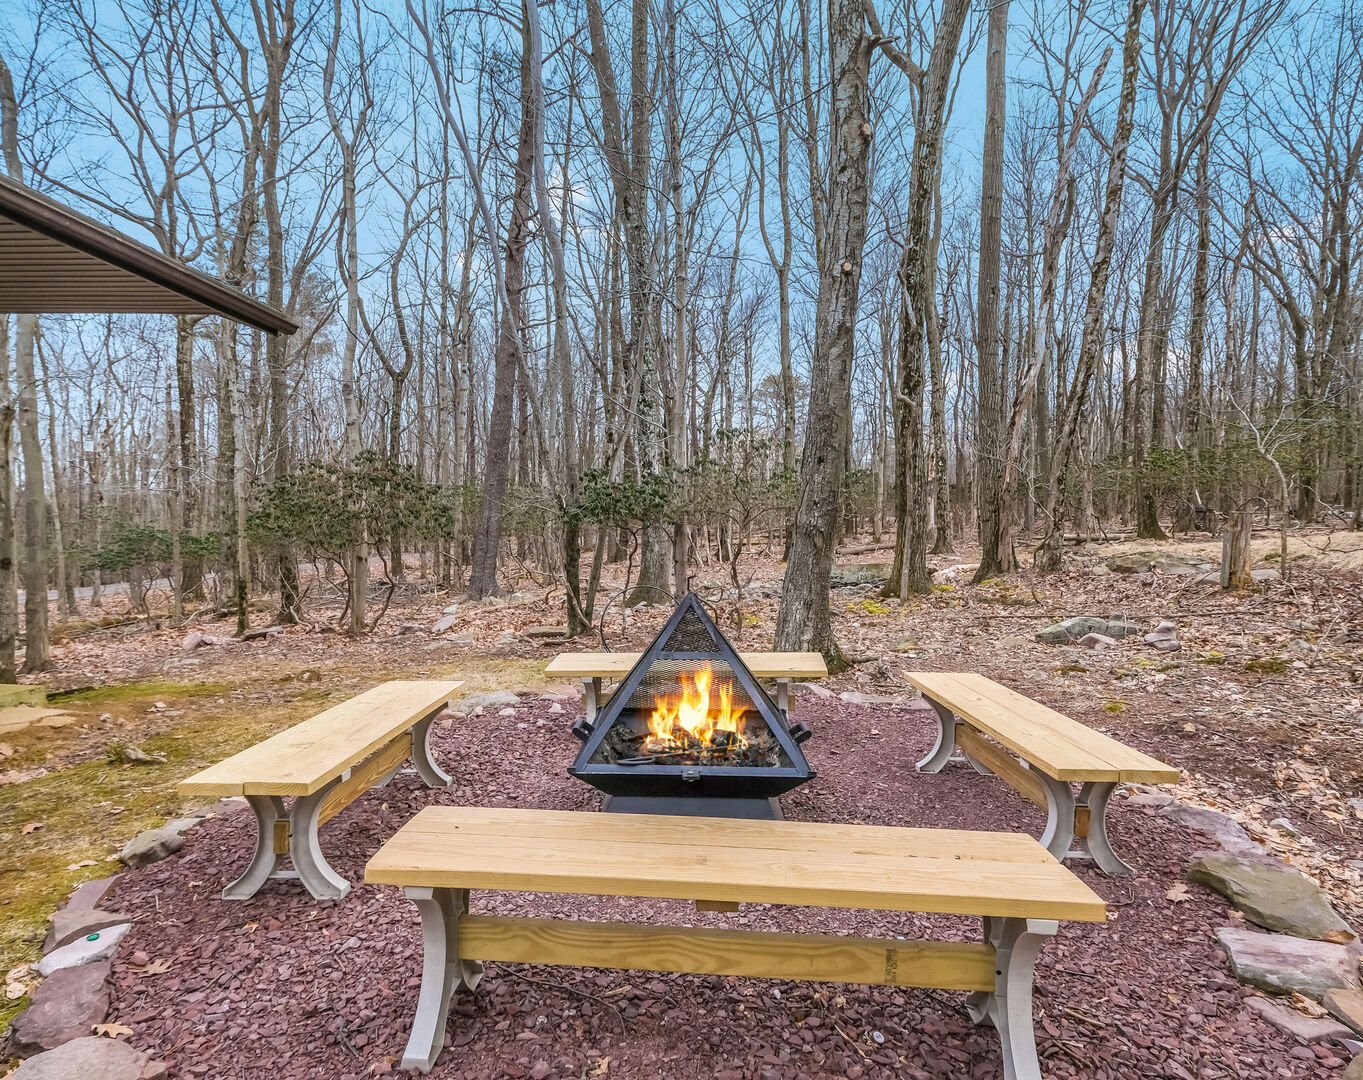 Outdoor Seating Area with Benches and Fire Pit.